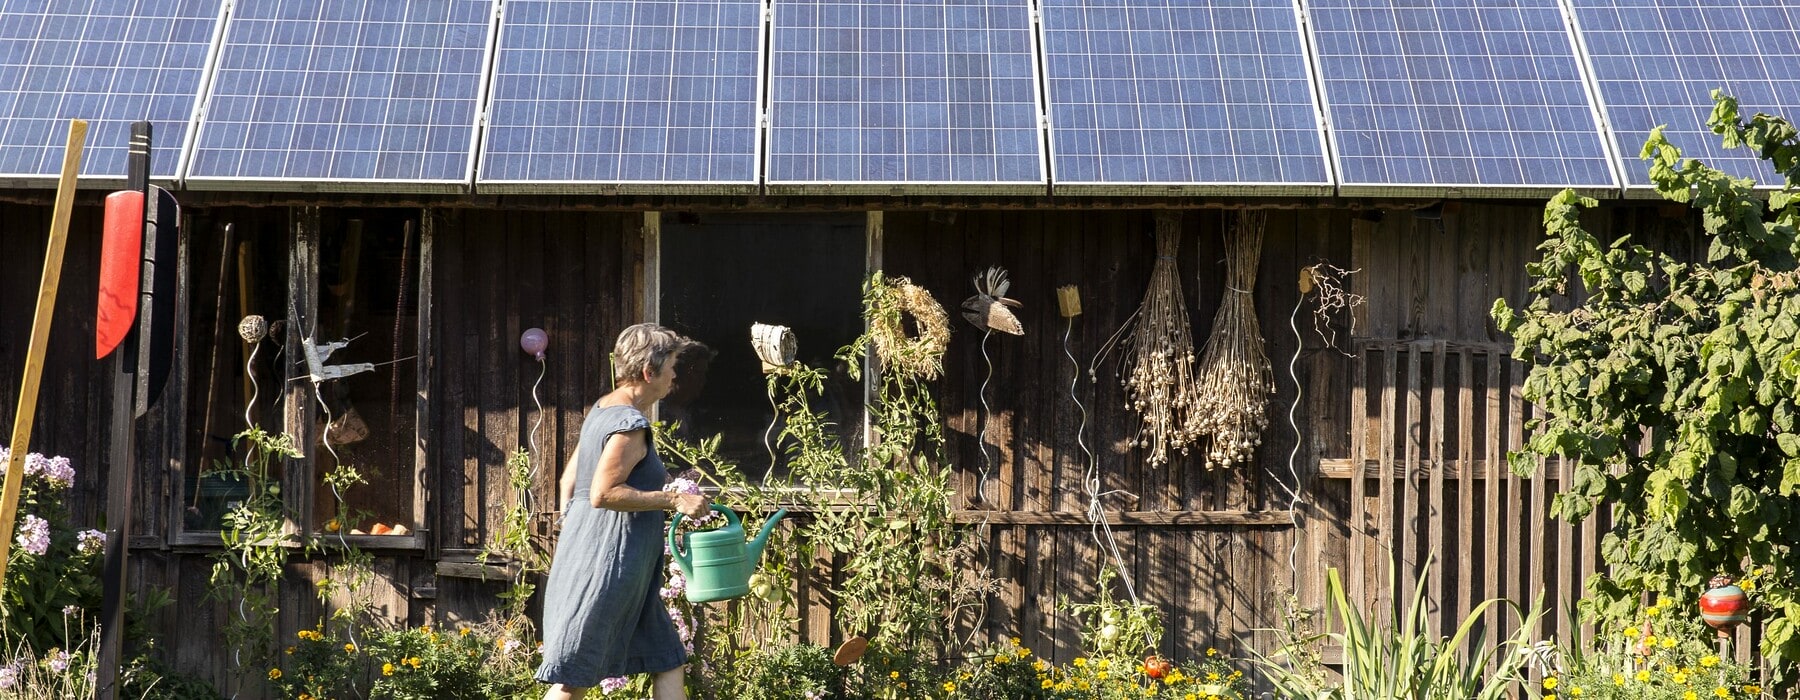 Woman with watering can next to roof of solar panels